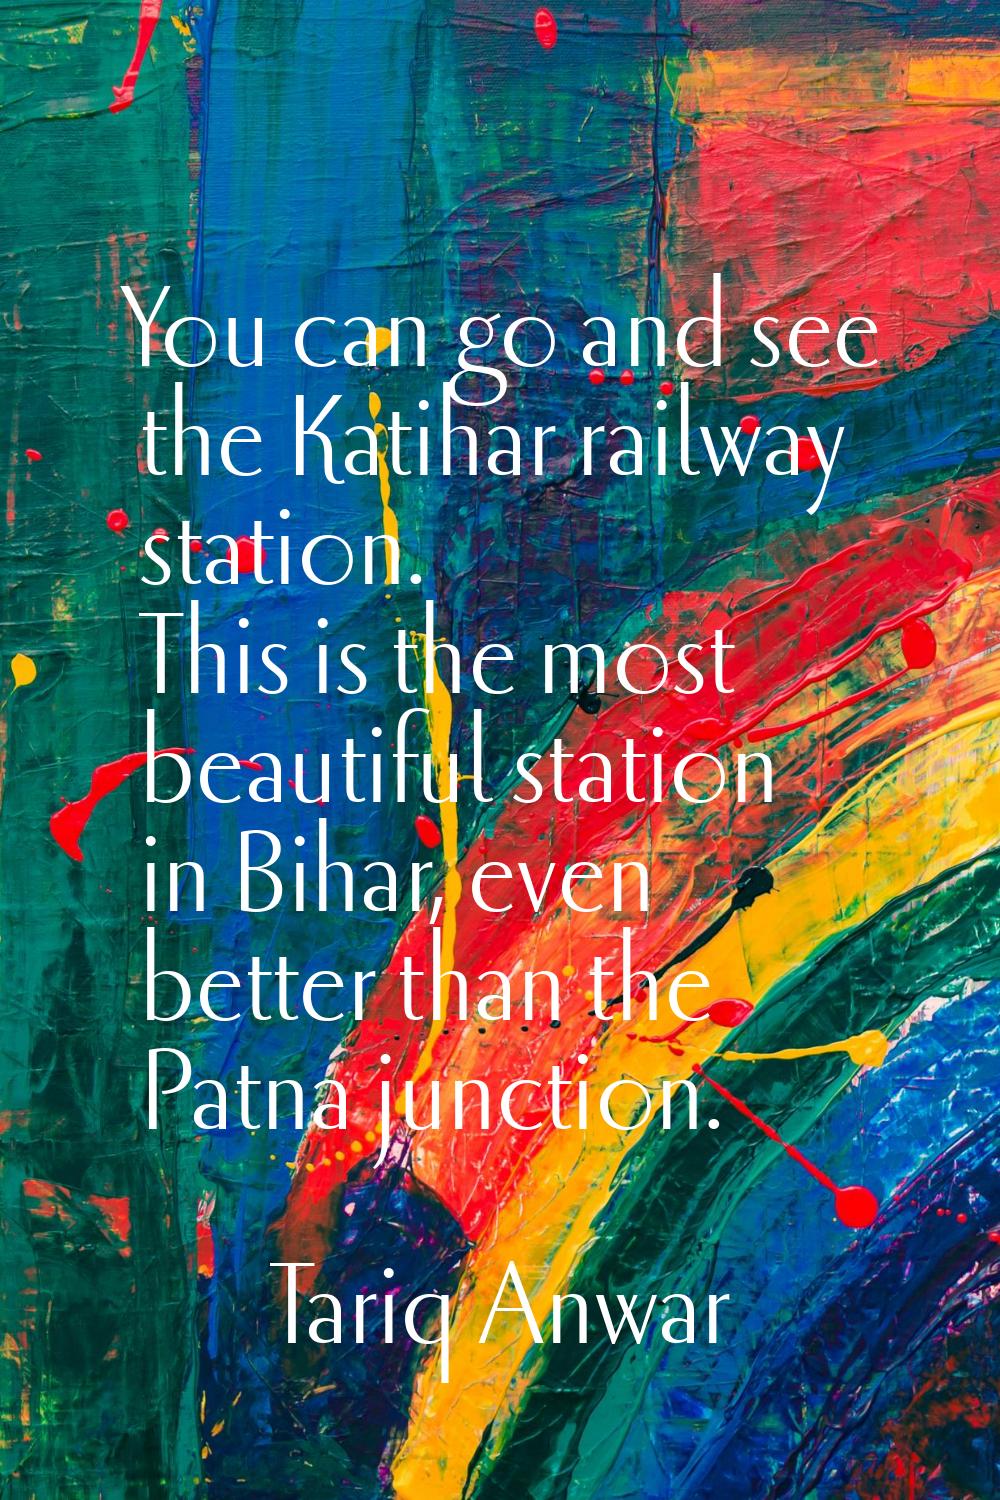 You can go and see the Katihar railway station. This is the most beautiful station in Bihar, even b